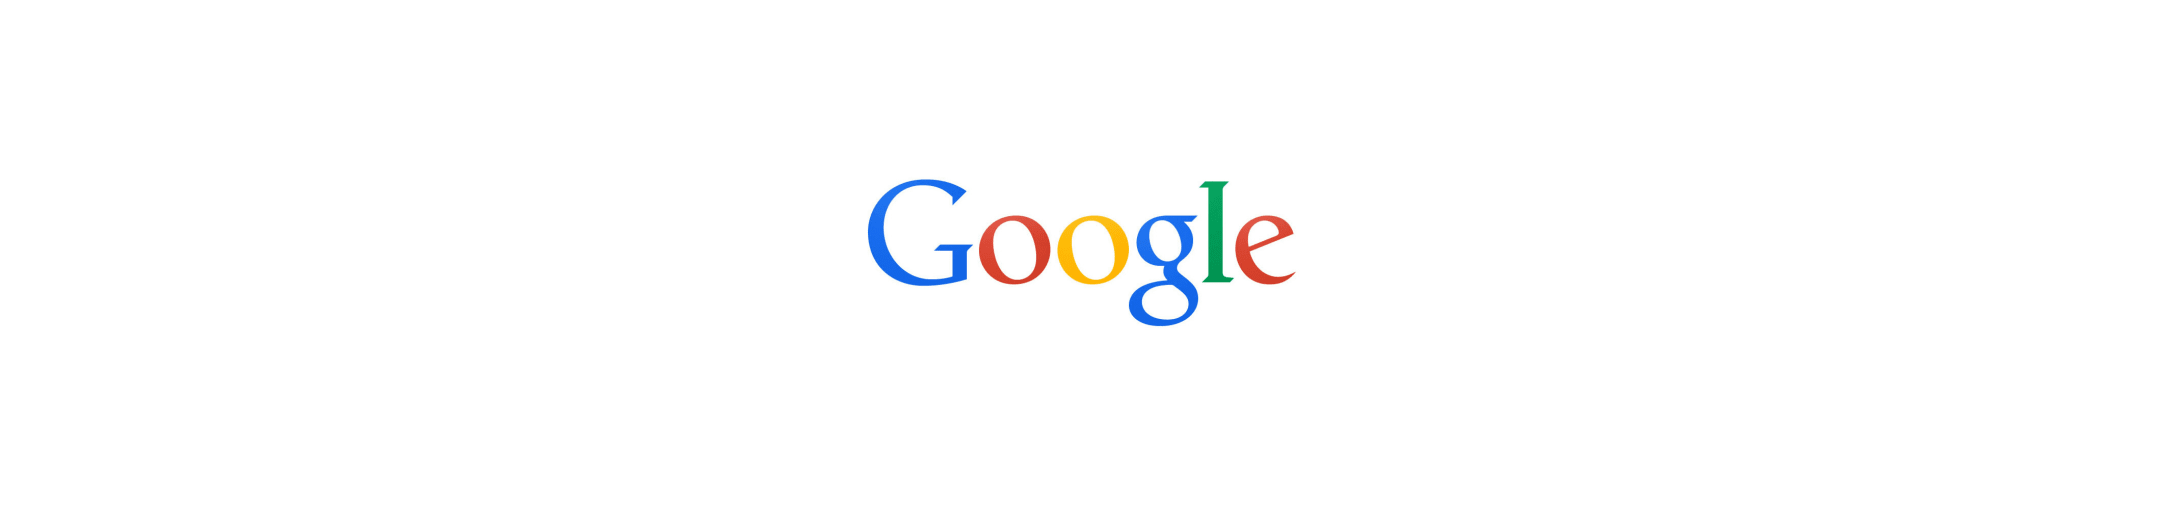 Google logo for thumbnail – use this one